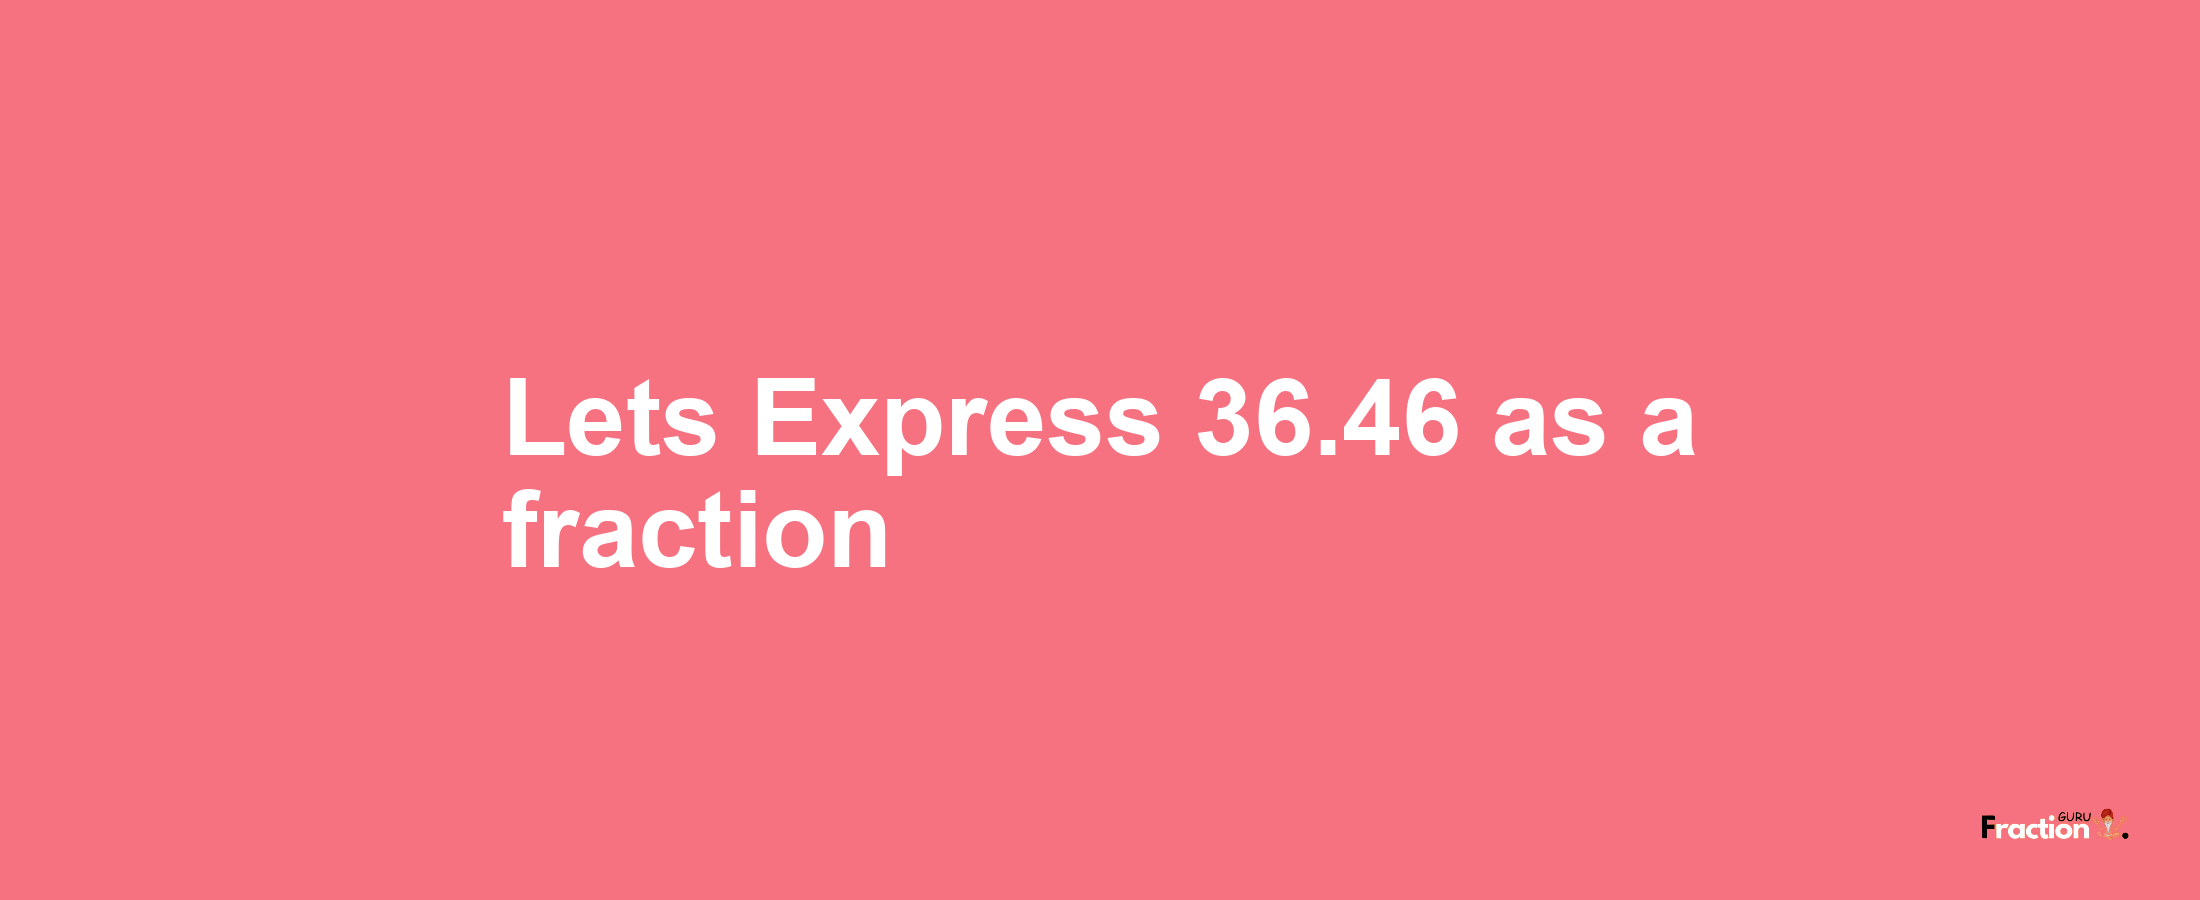 Lets Express 36.46 as afraction